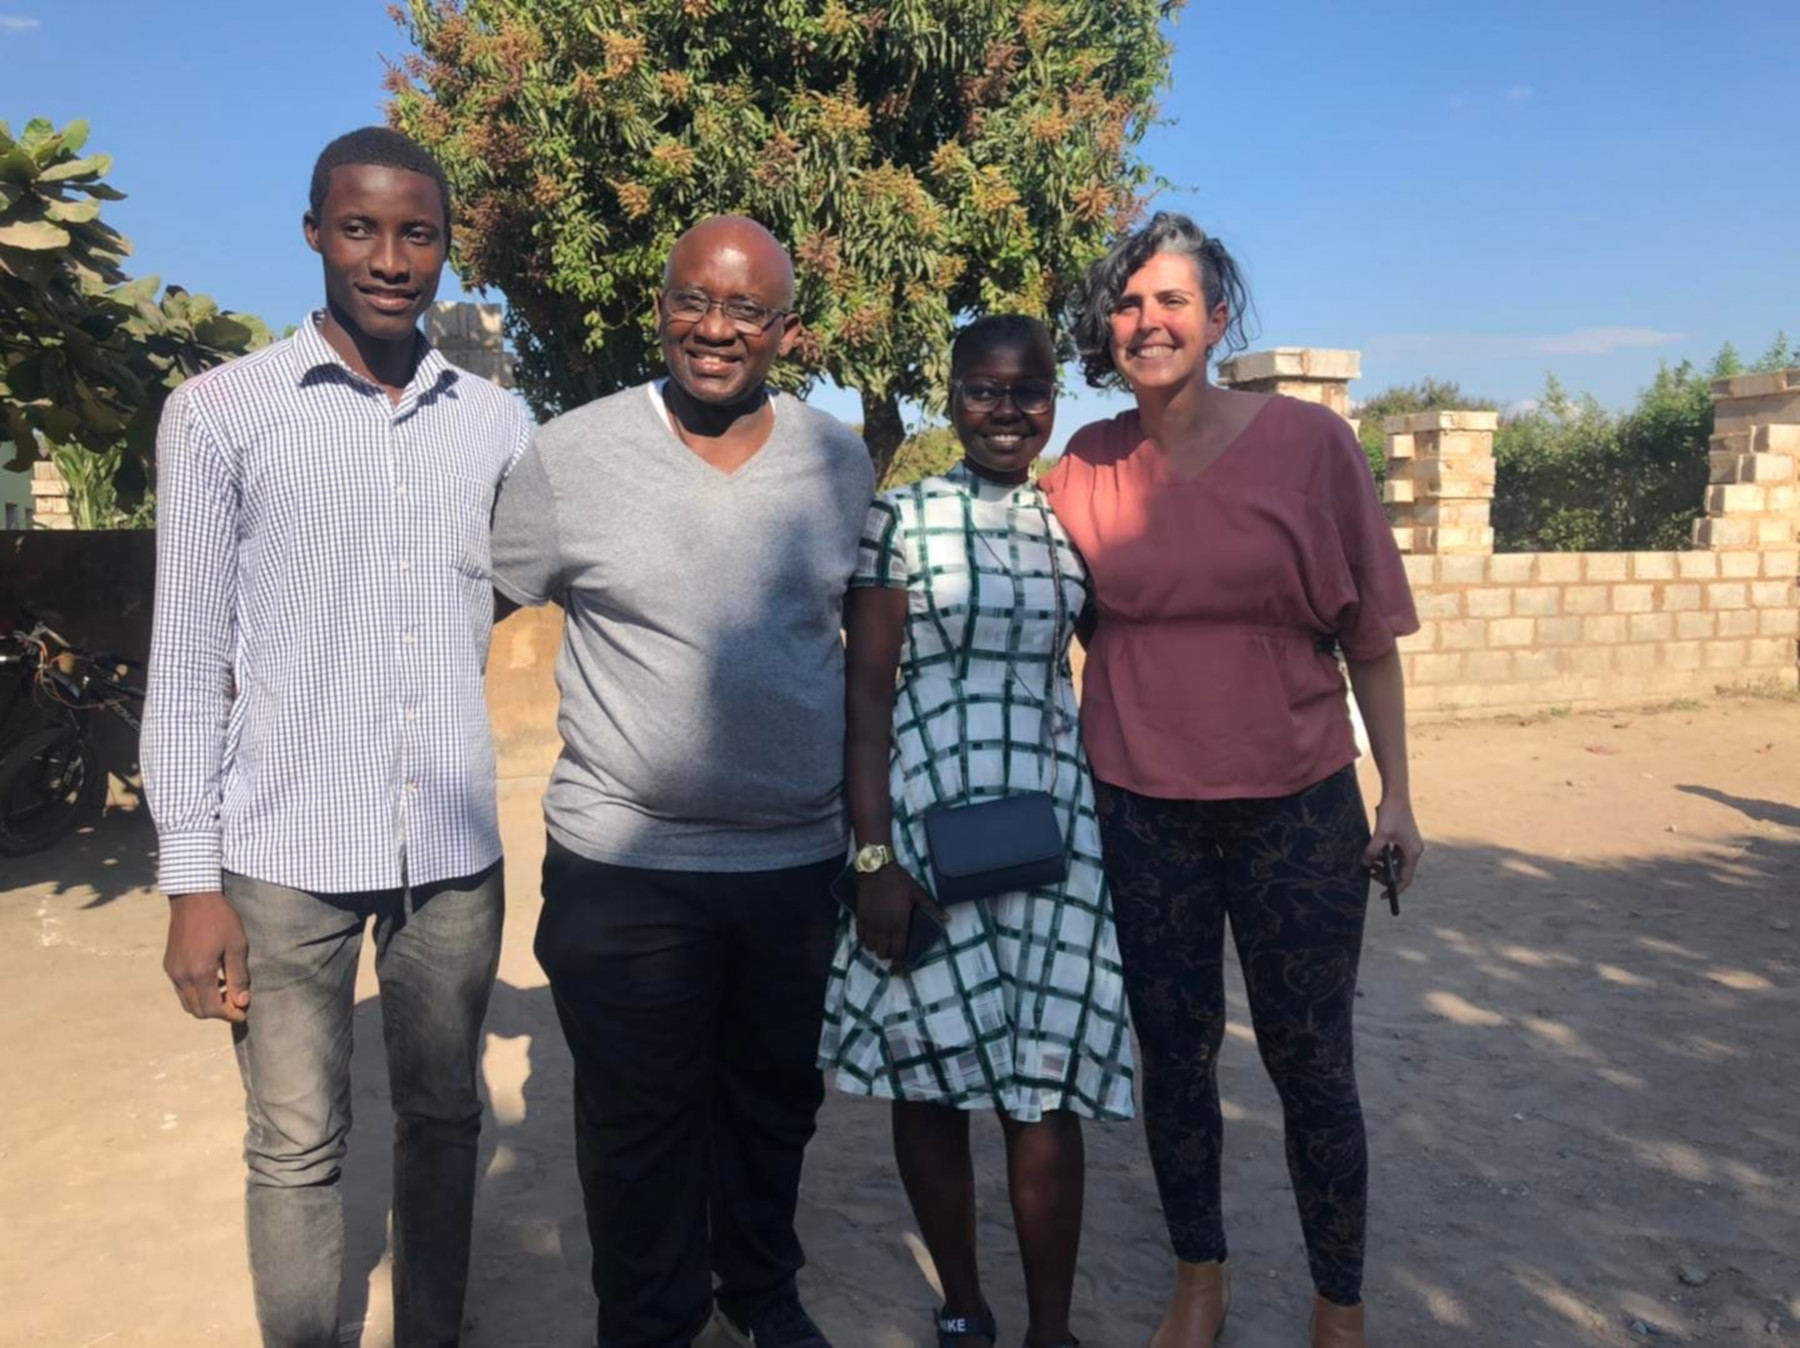 Maureen Mbanga and Ngambela Zulu with Dr. Moono and Julie-Anne Savarit-Cosenza, Co-Founder and Executive Director of the African Education Program, outside in Zambia